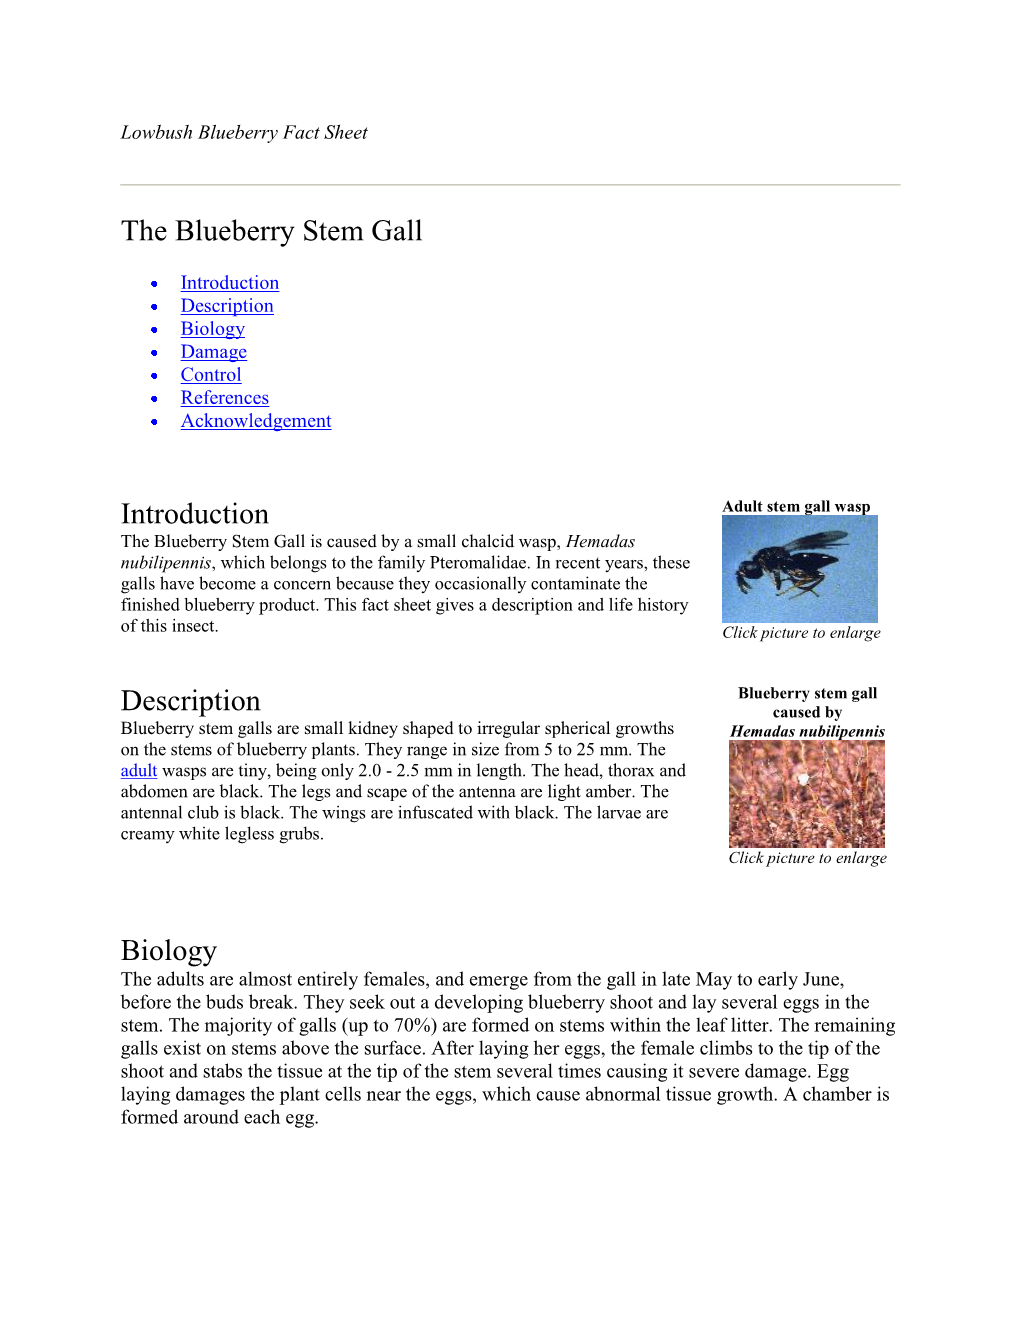 The Blueberry Stem Gall Introduction Description Biology